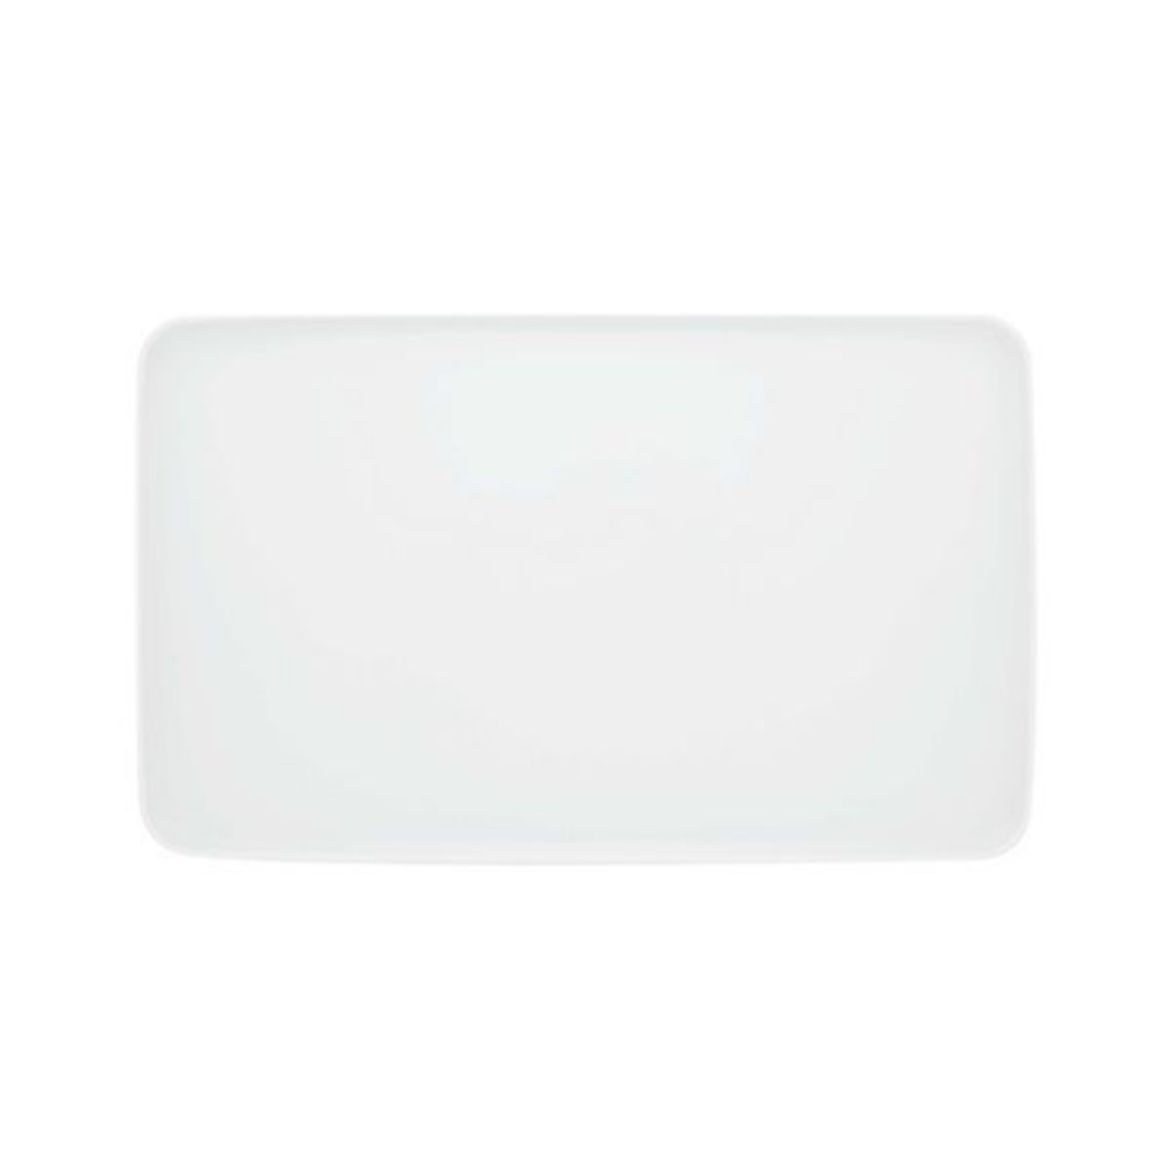 Picture of Silkroad White Small Rectangular Platter